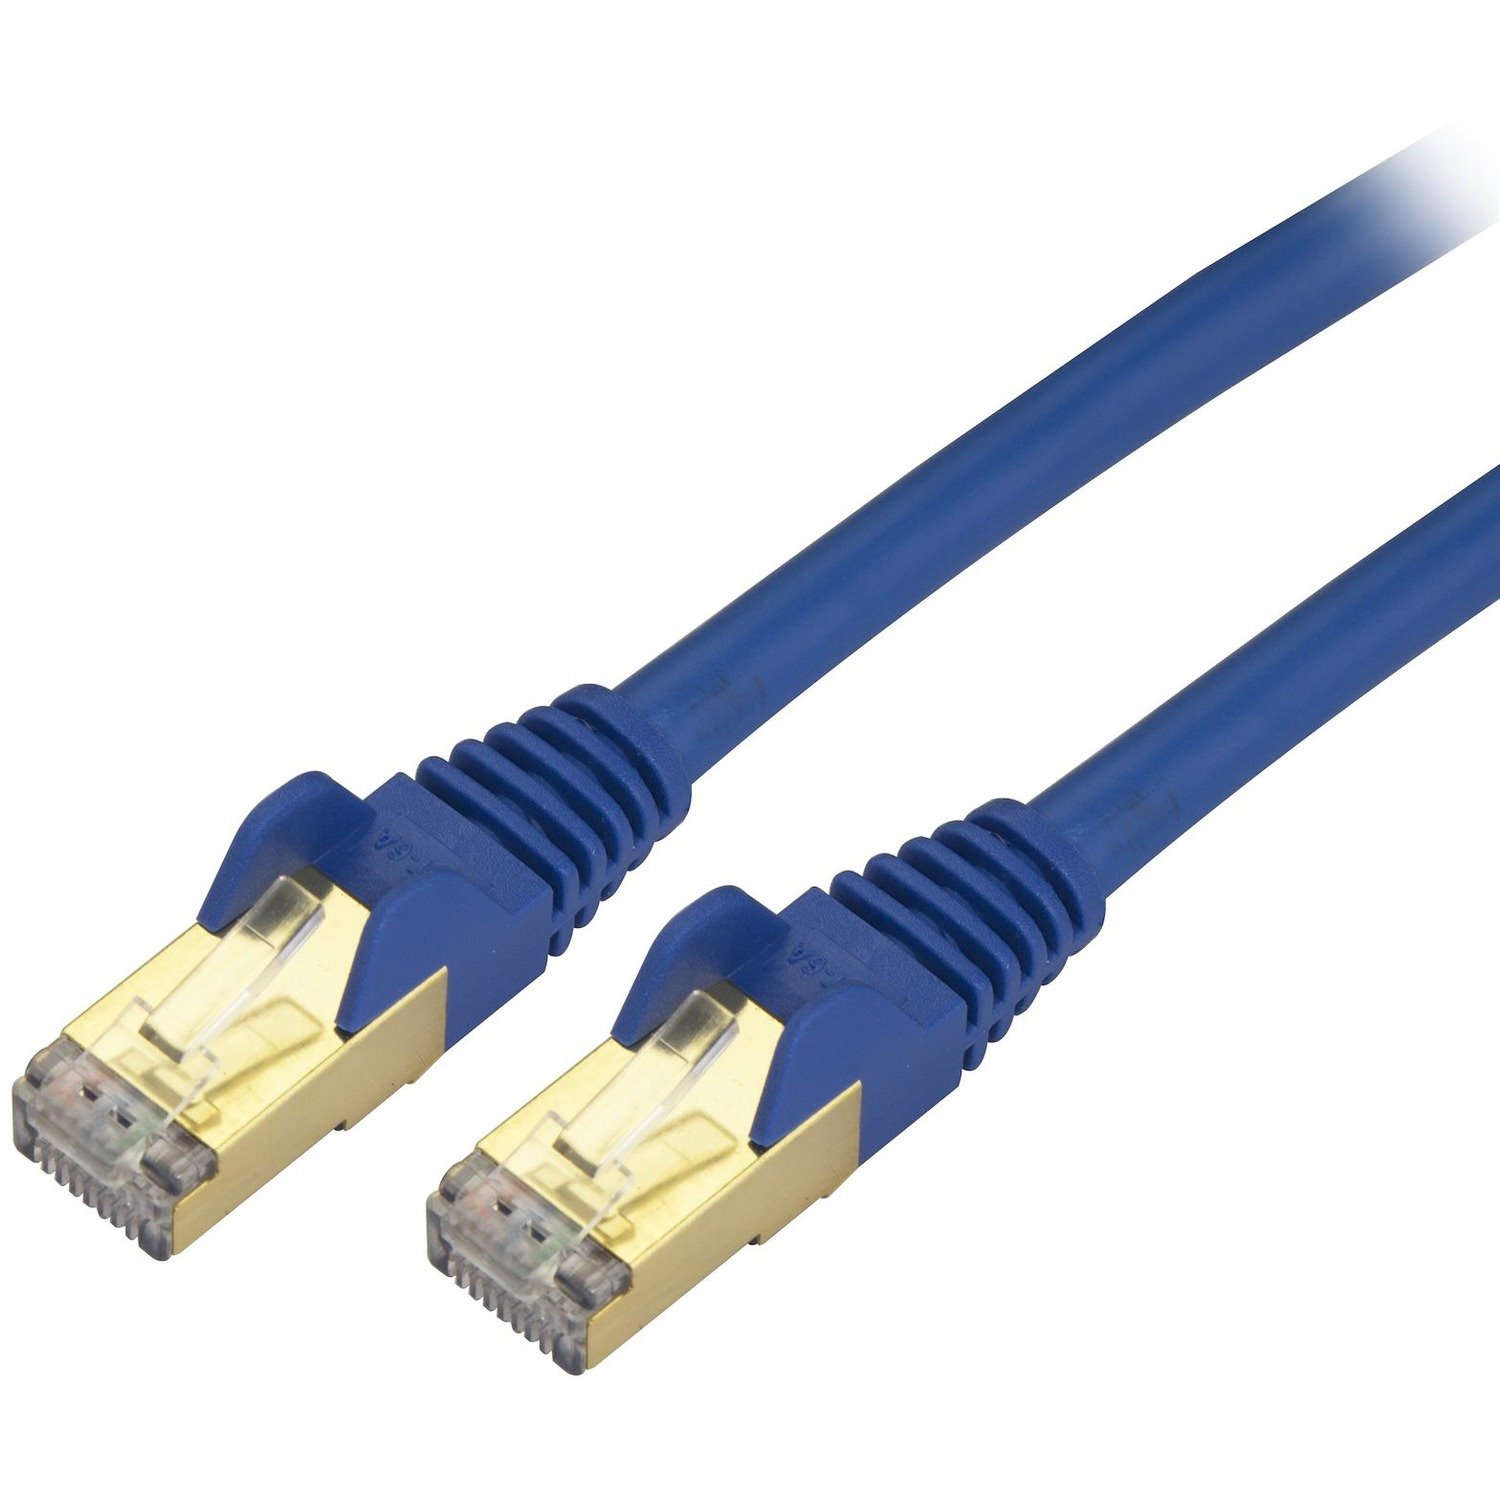 StarTech.com 10ft CAT6a Ethernet Cable - 10 Gigabit Category 6a Shielded Snagless 100W PoE Patch Cord - 10GbE Blue UL Certified Wiring/TIA